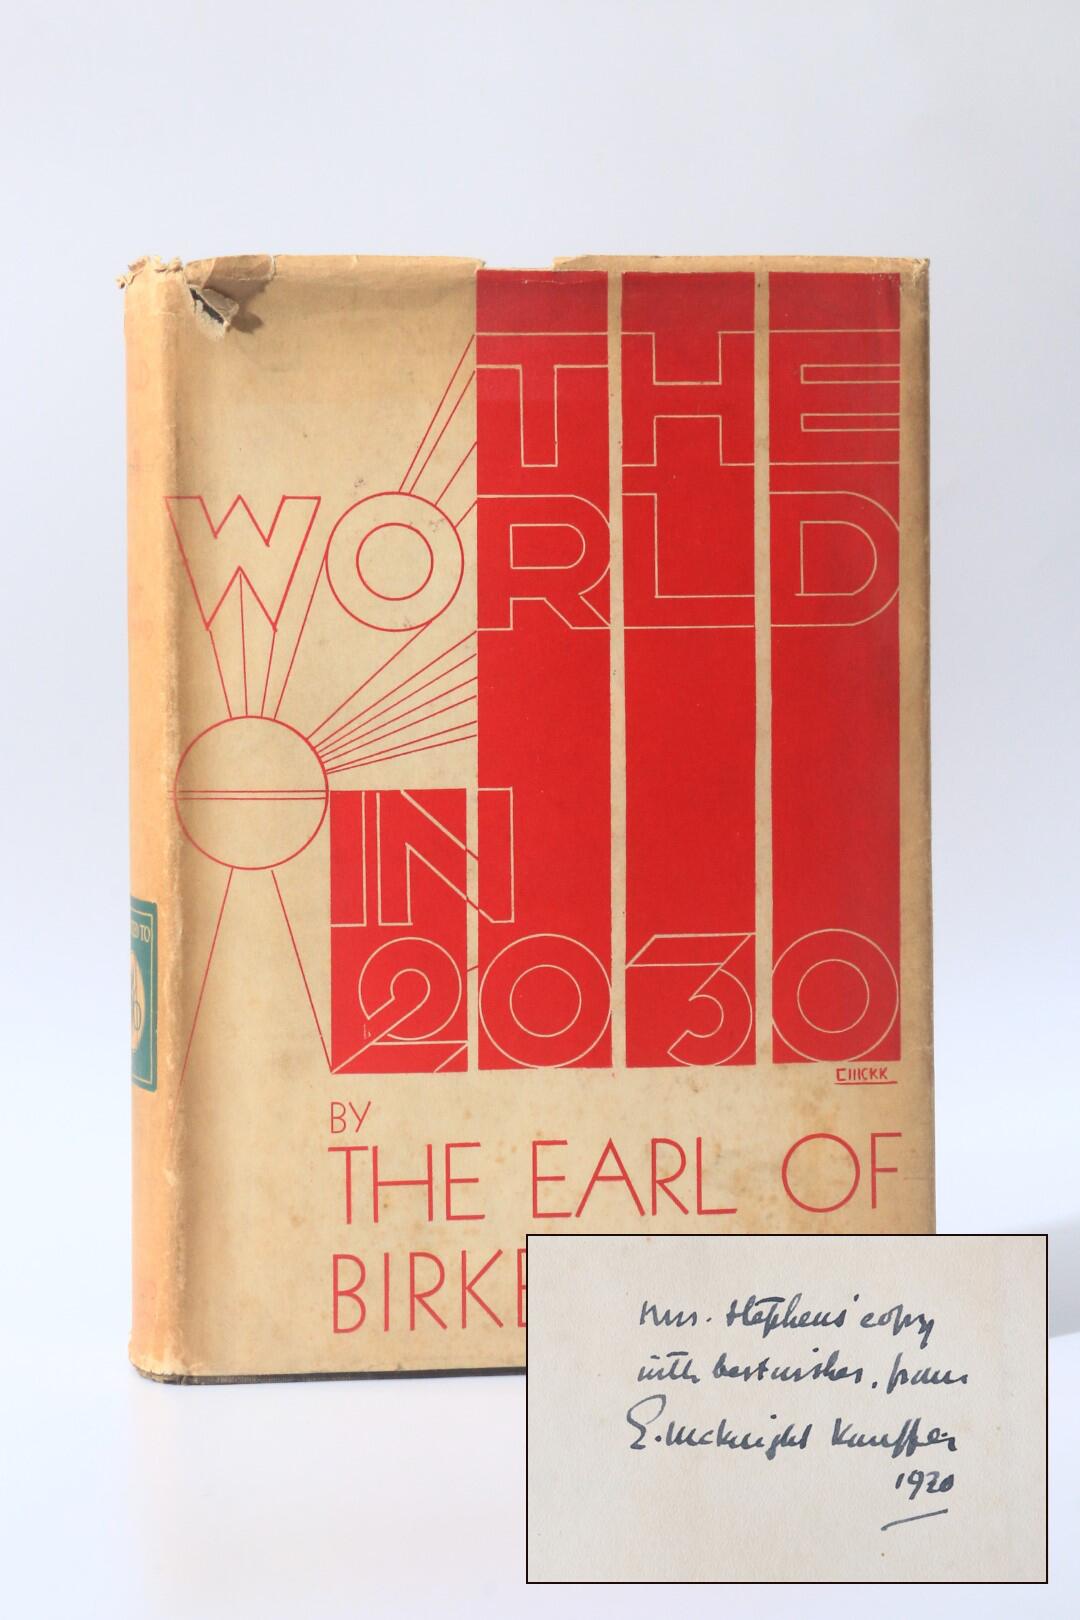 The Earl of Birkenhead [Frederick Edwin Smith] - The World in 2030 - Hodder & Stoughton, 1930, Signed First Edition.